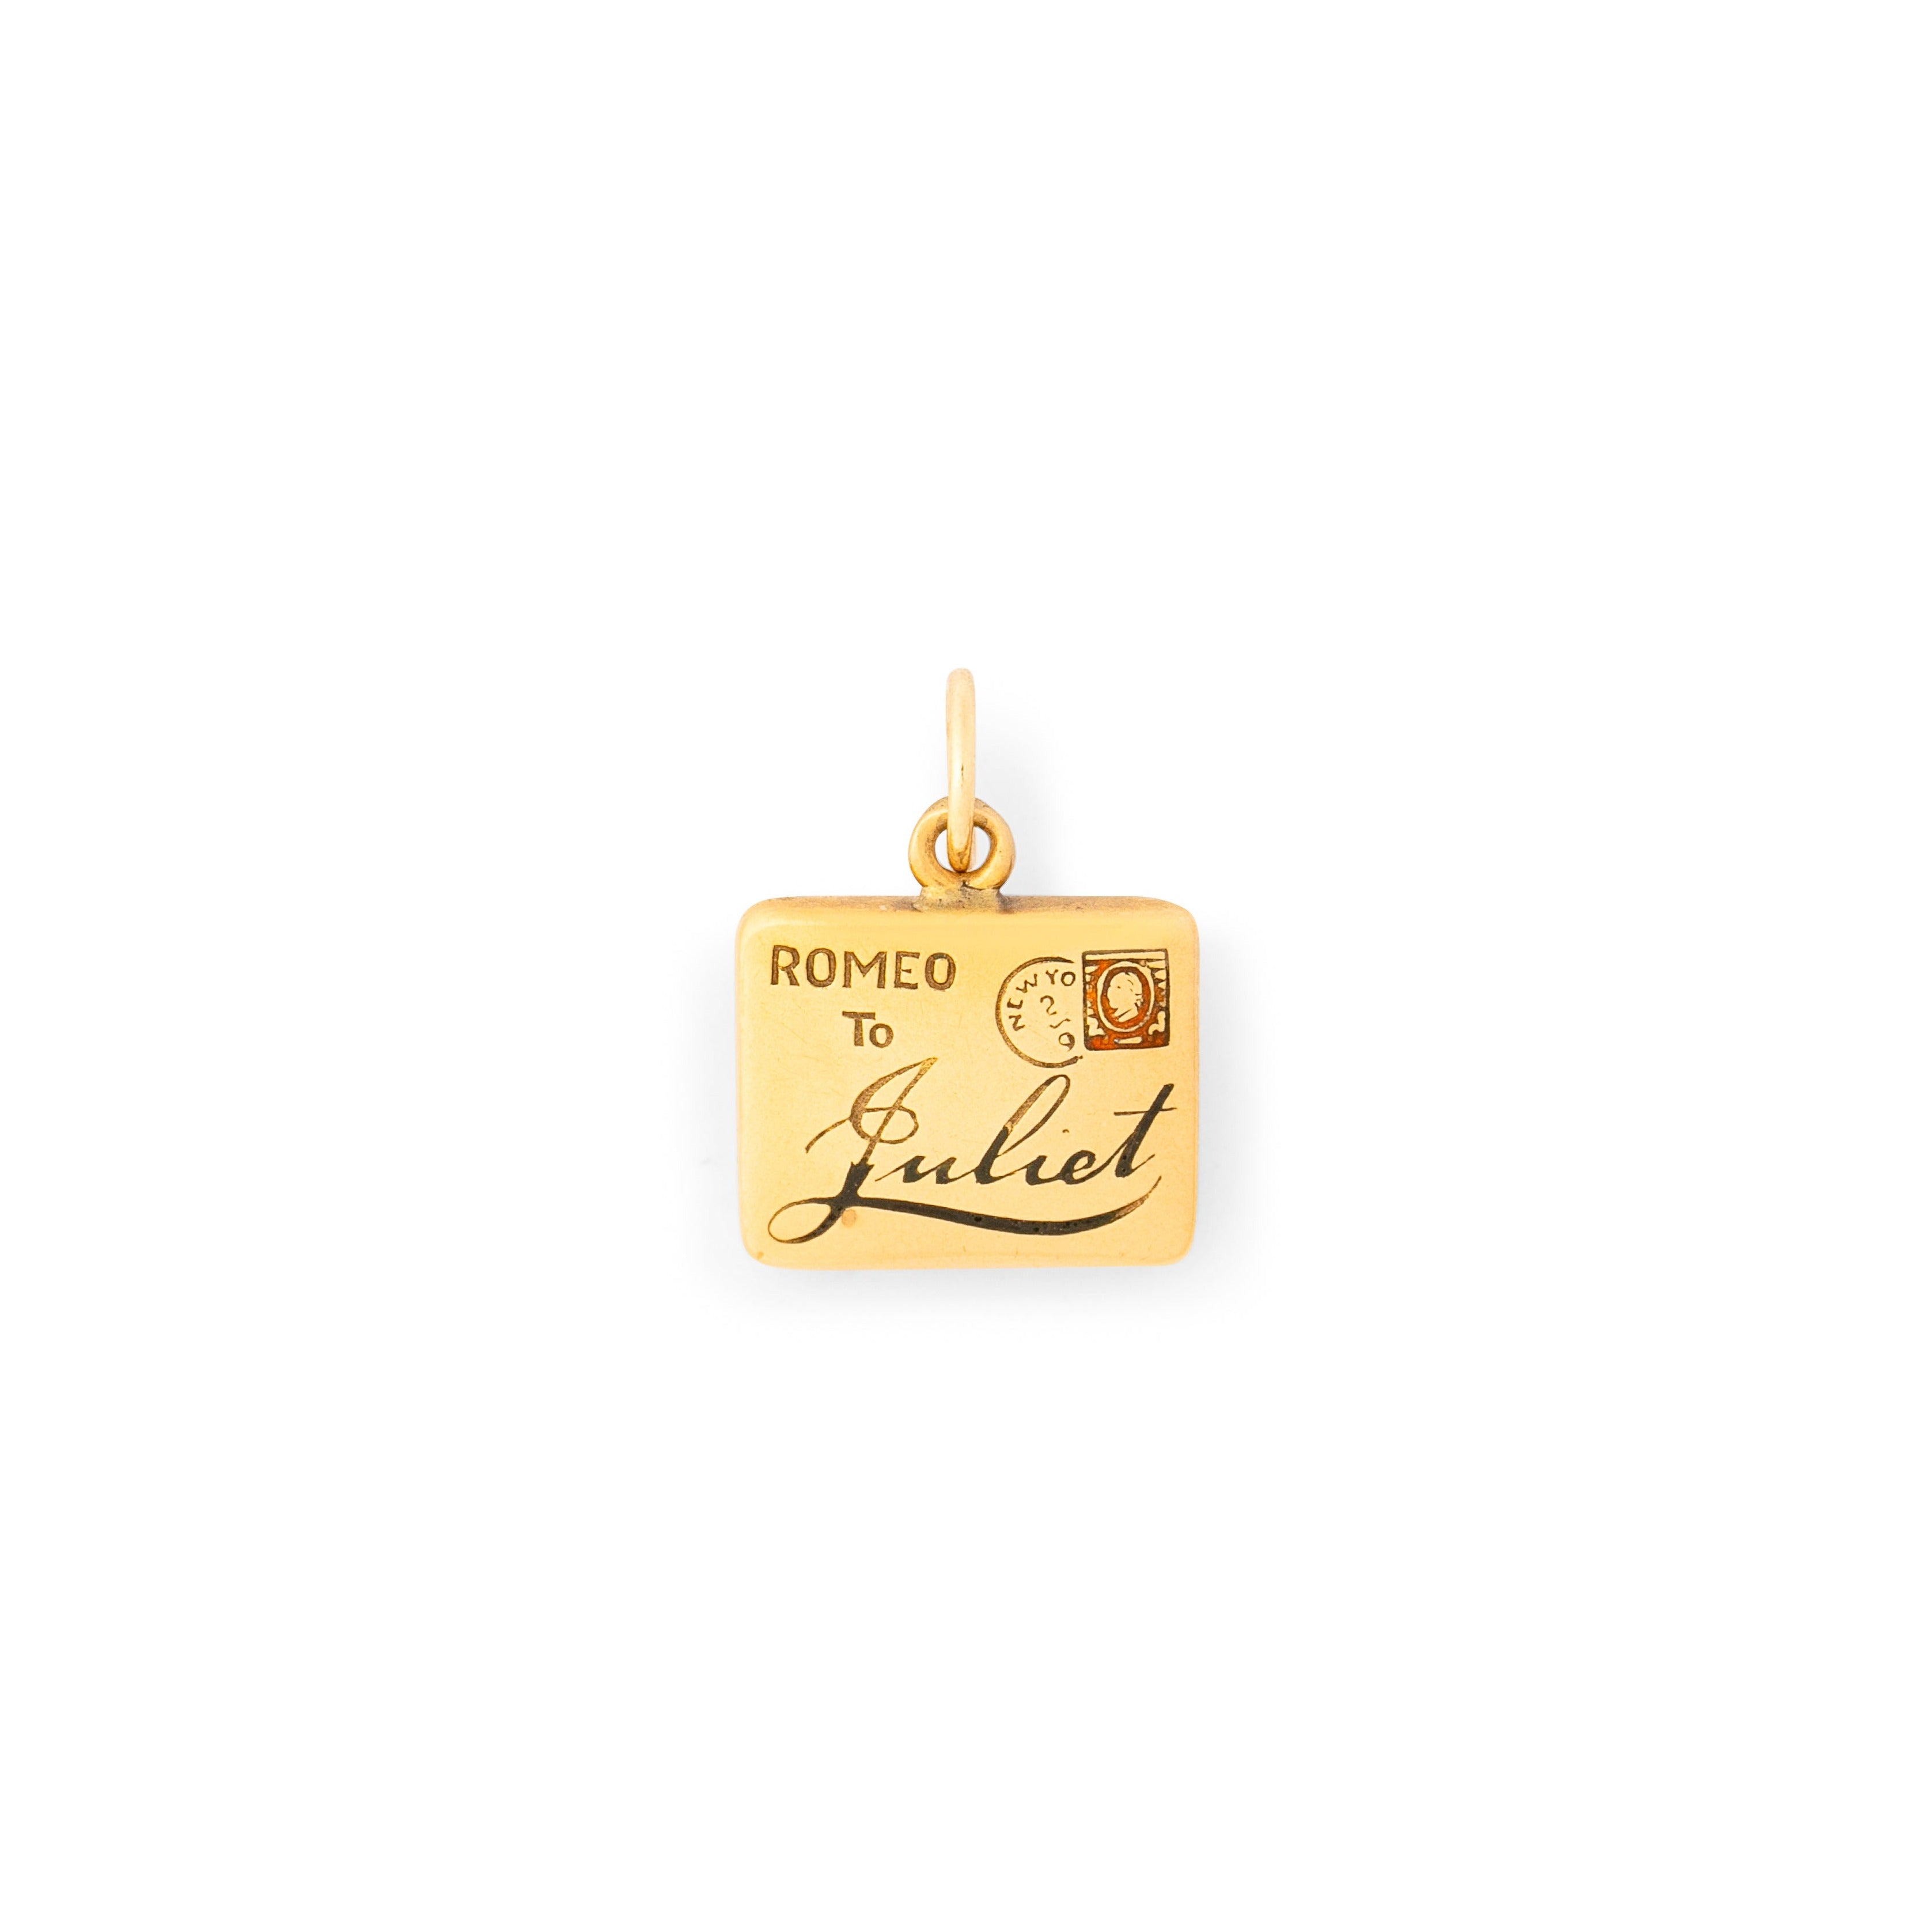 "Romeo To Juliet" Love Letter 14k Gold and Enamel Charm